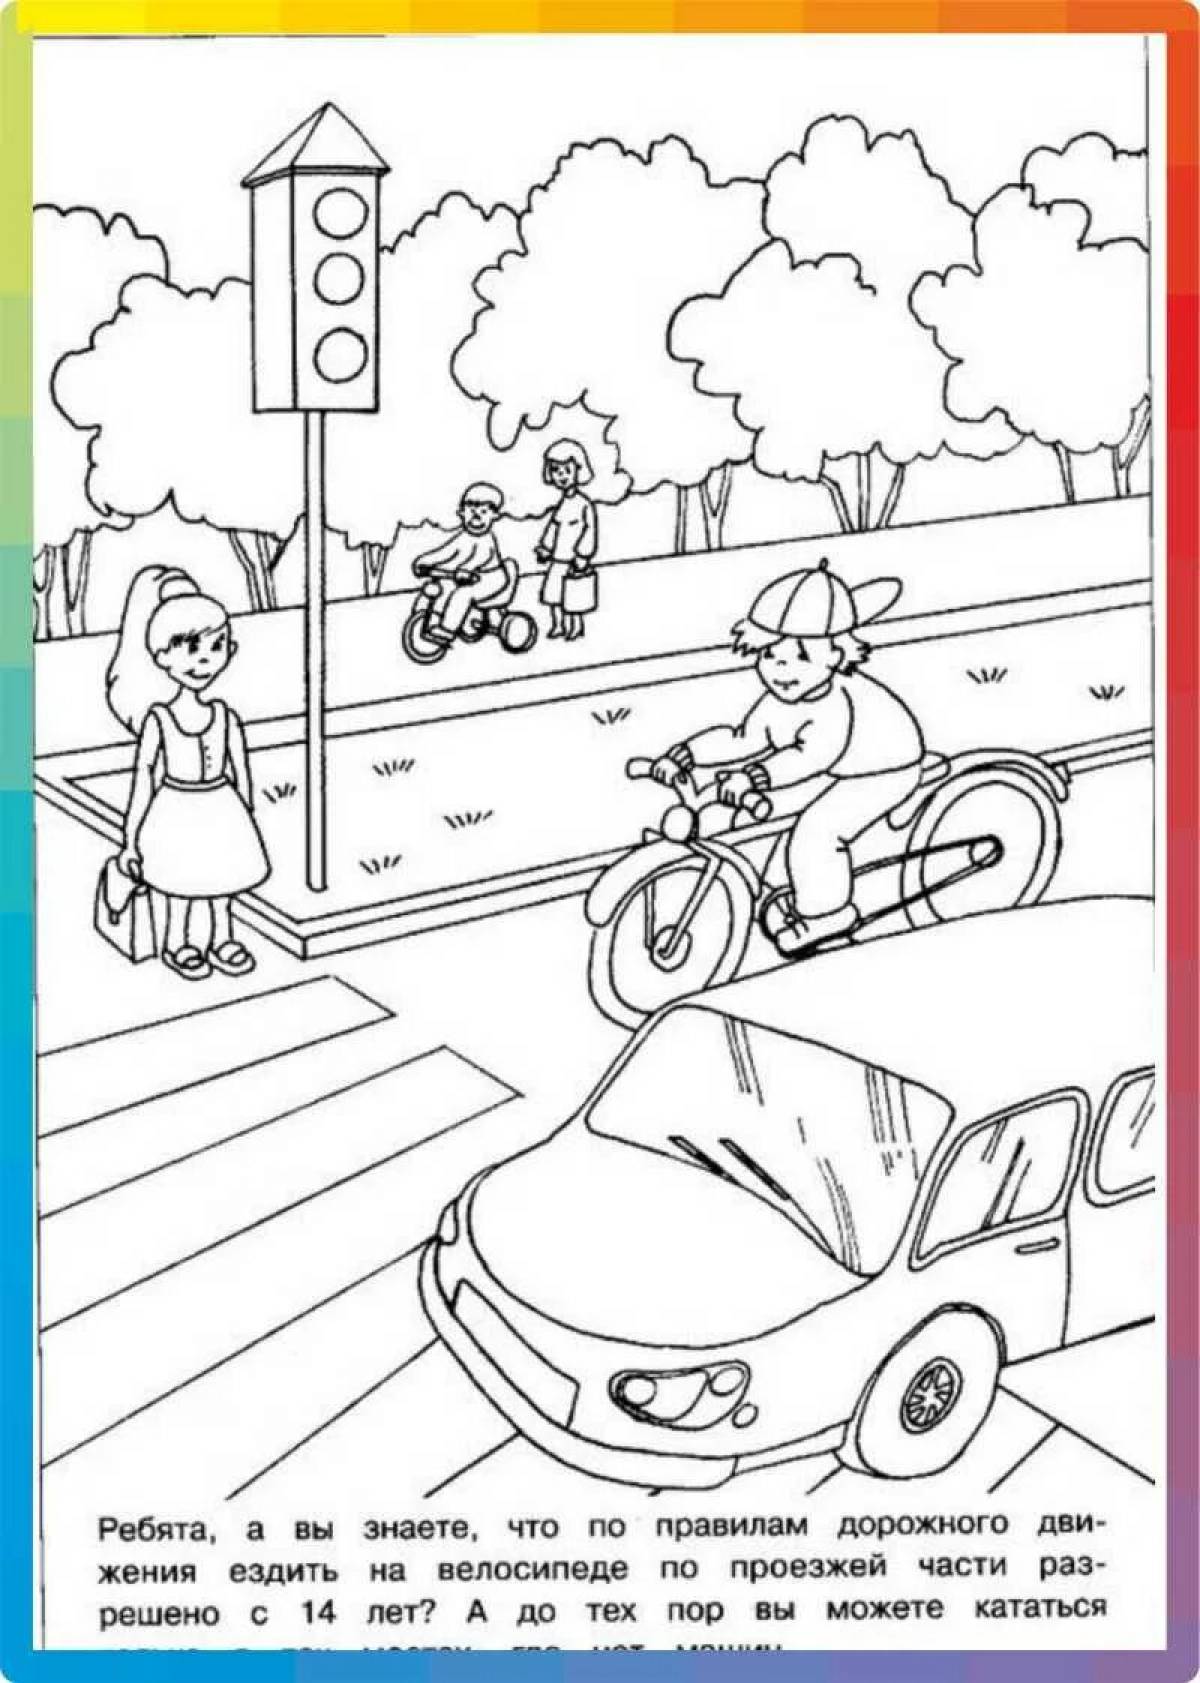 On the topic of traffic rules for kindergarten #10